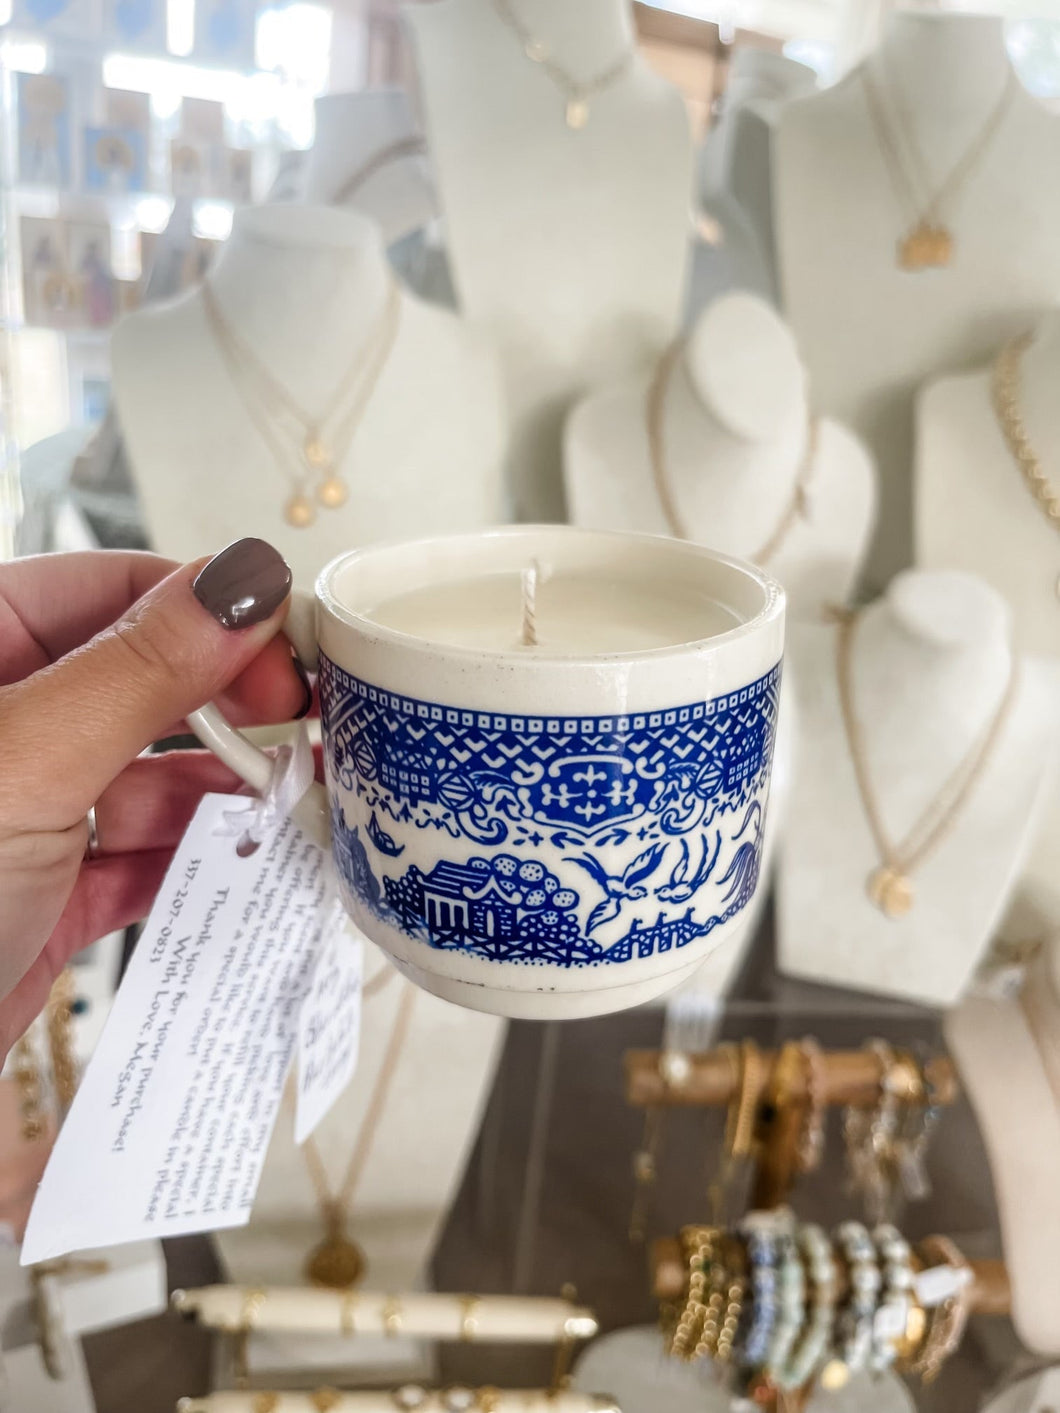 Blue Skies Blue and White Tea Cup A scented candle-Belle Reve Designs by Megan Gatte